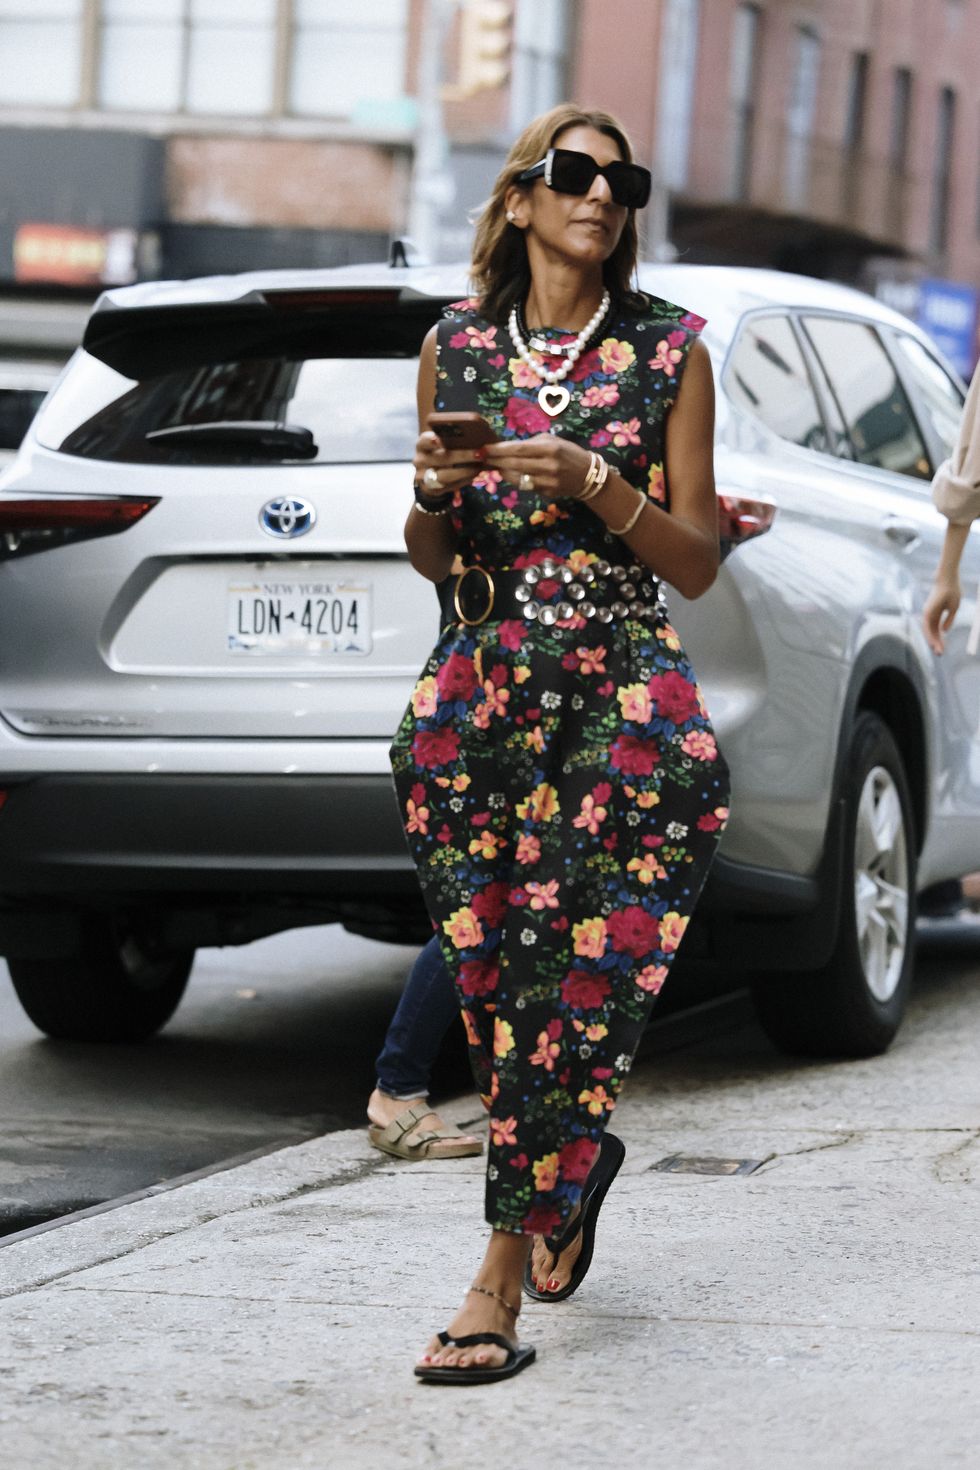 7 Street Style Trends We've Seen All Over London Fashion Week